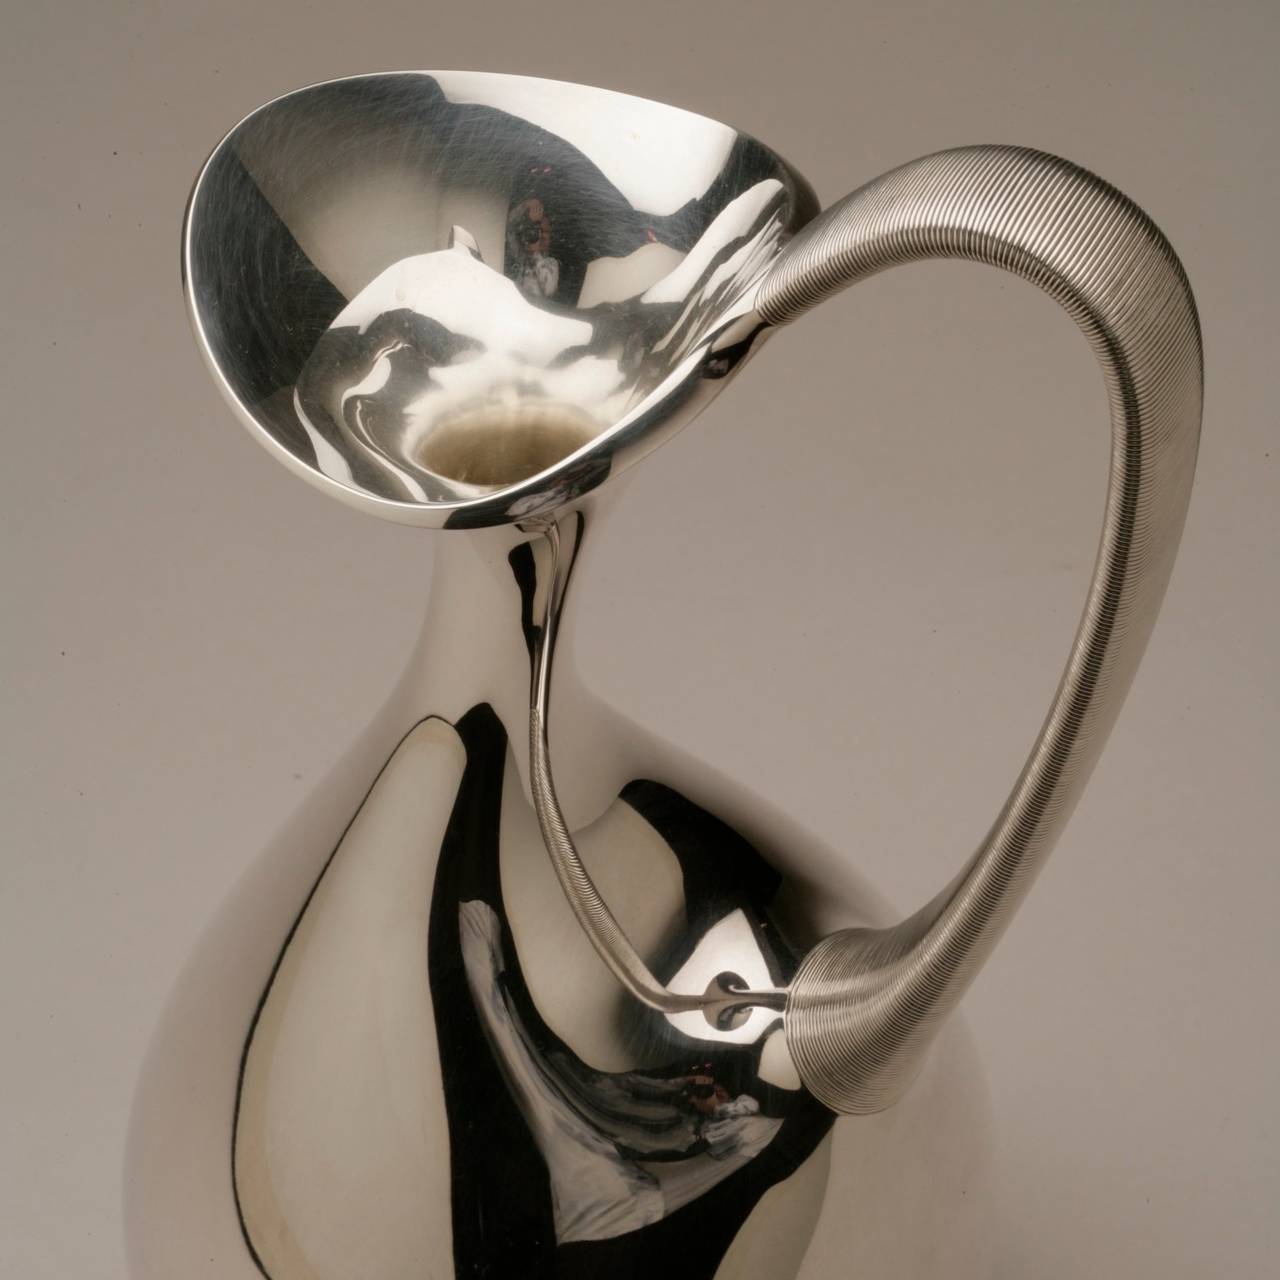 Georg Jensen sterling silver pitcher No. 978 by Henning Koppel. Large sculptural form water pitcher. Sensuous, elegant handle.

Designed in 1948. Awarded the Gold Medal at Triennale in 1951. 

Excellent Condition

Bio:

Henning